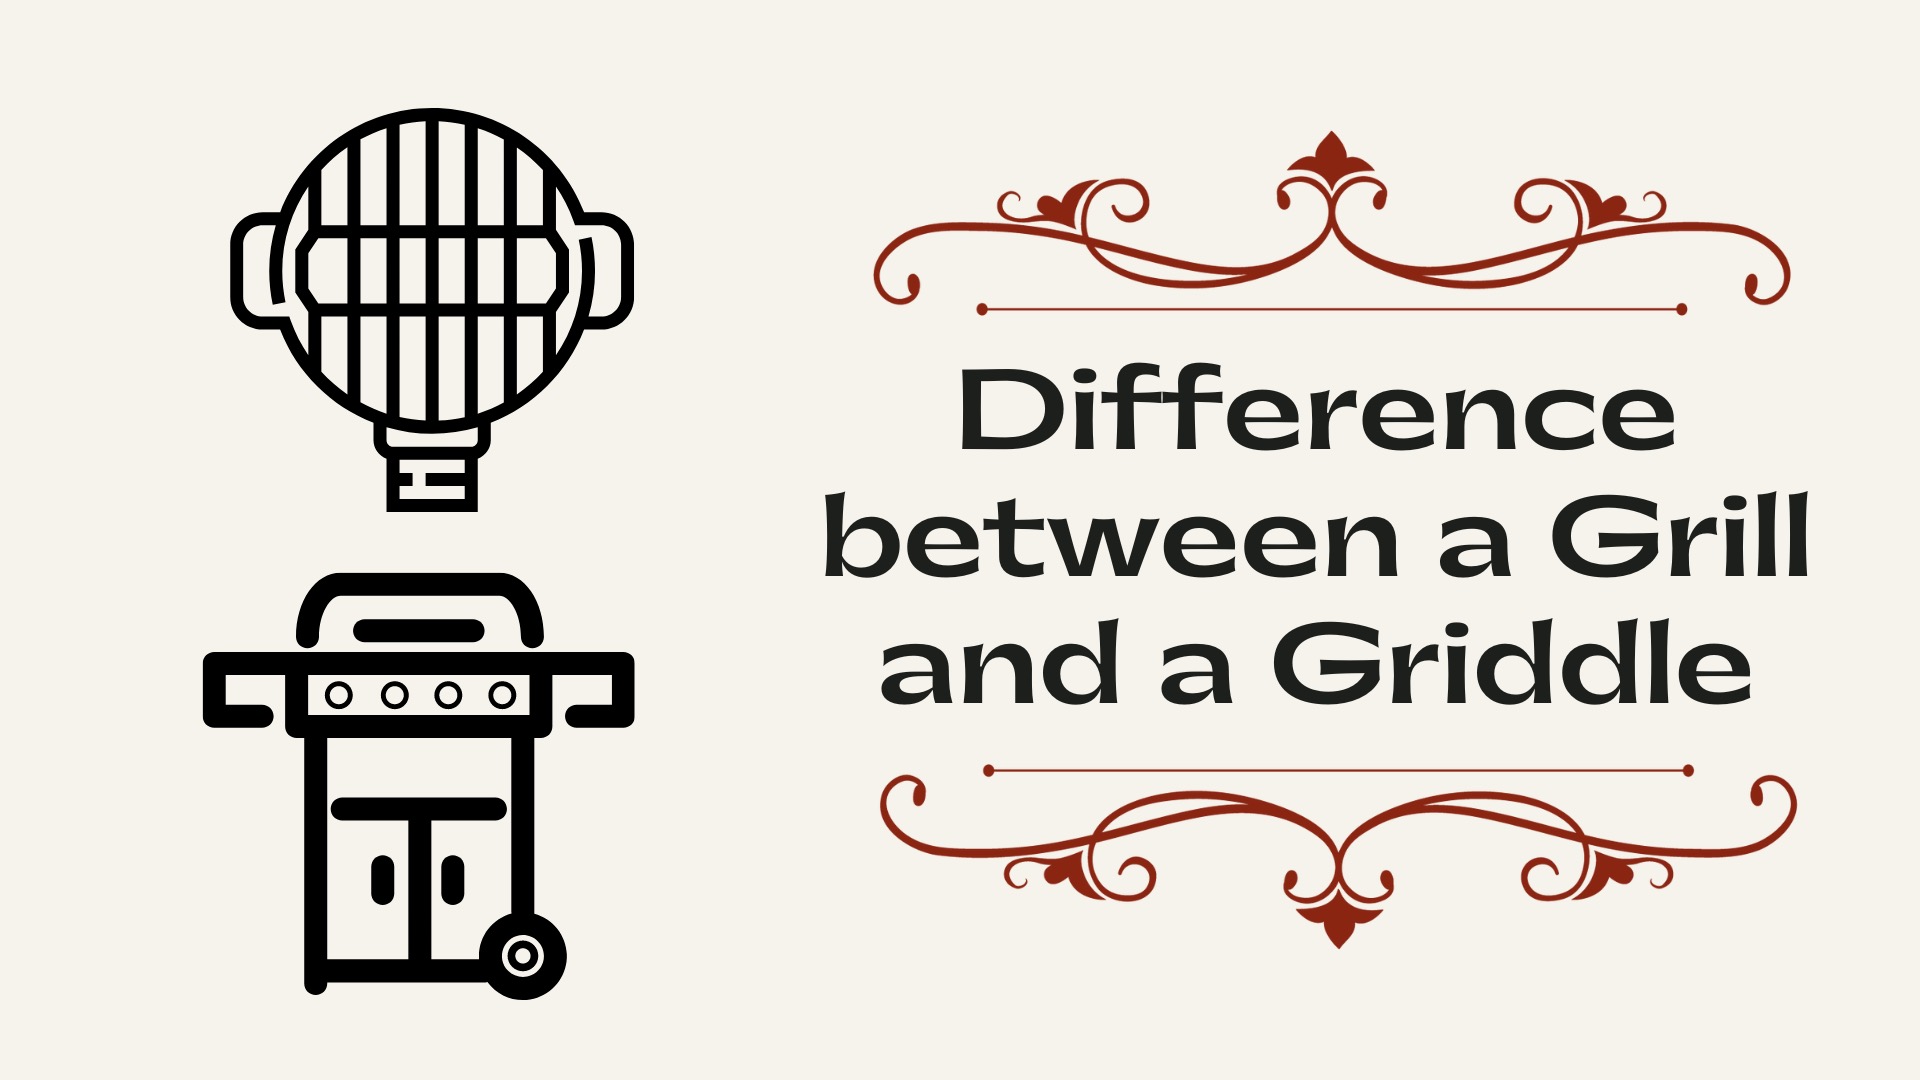 Difference between a Grill and a Griddle